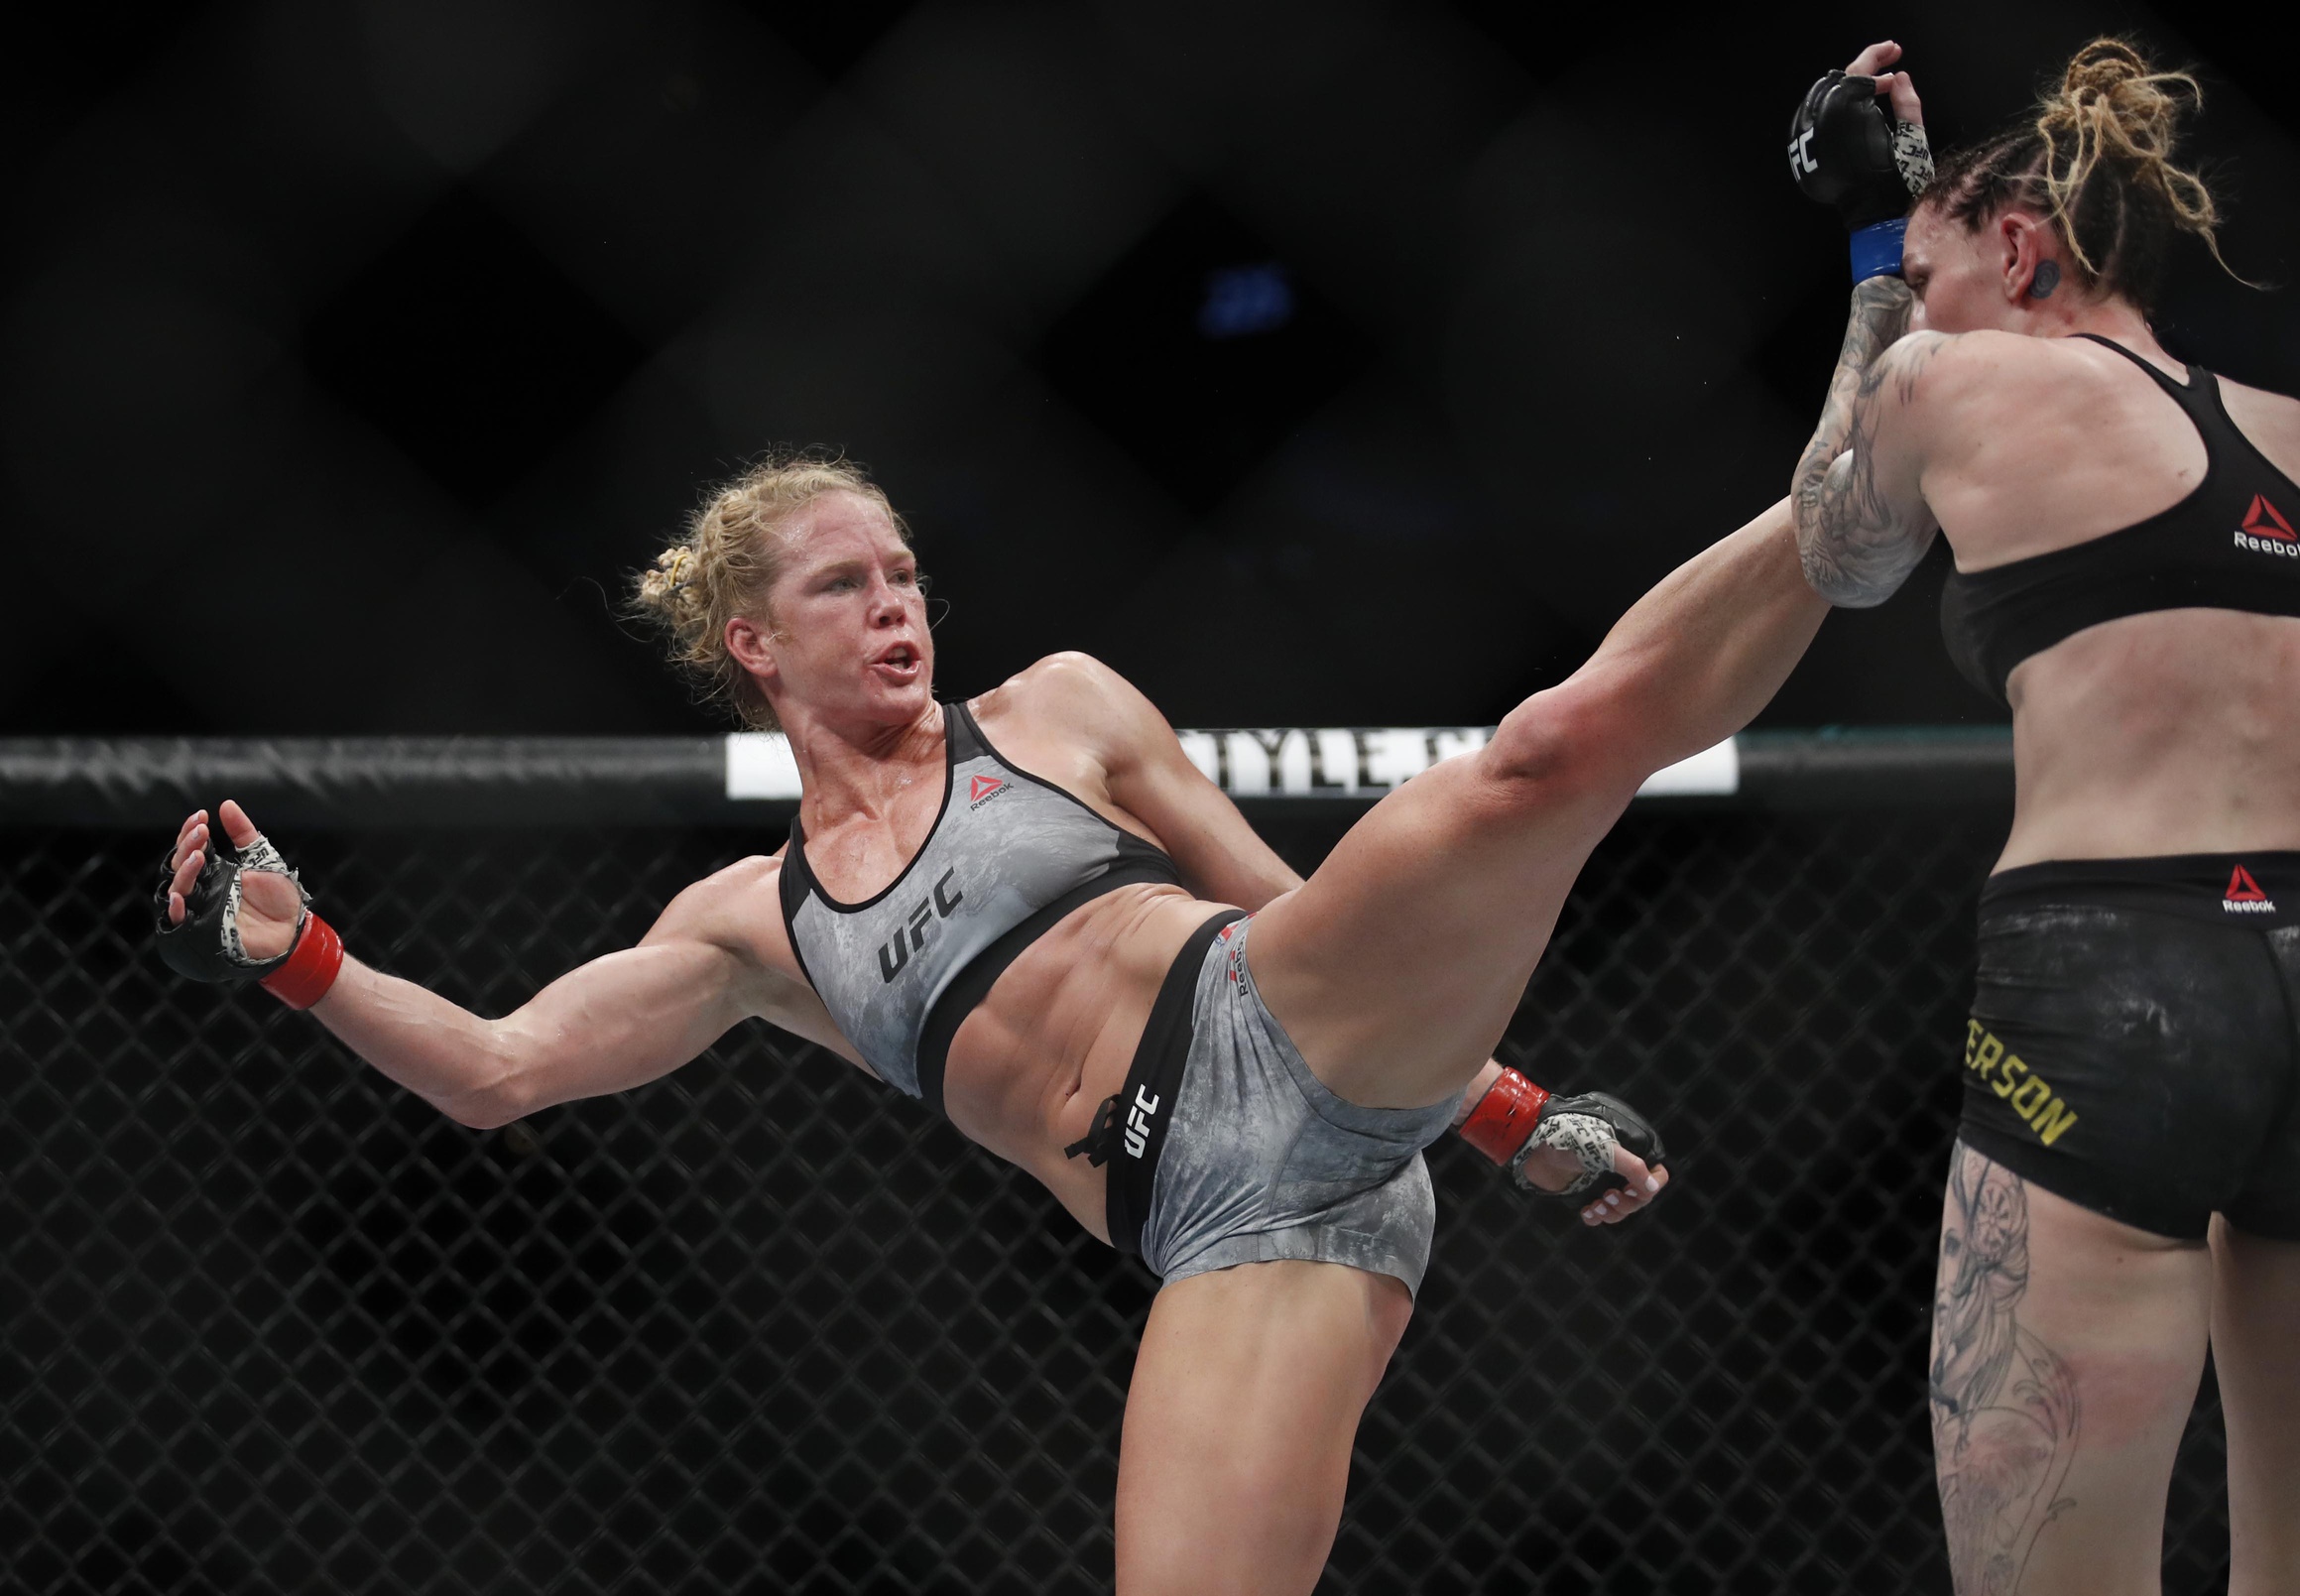 Ufc 225 Holly Holm Vs Megan Anderson Fight Video Photos And Analysis The Sports Daily 